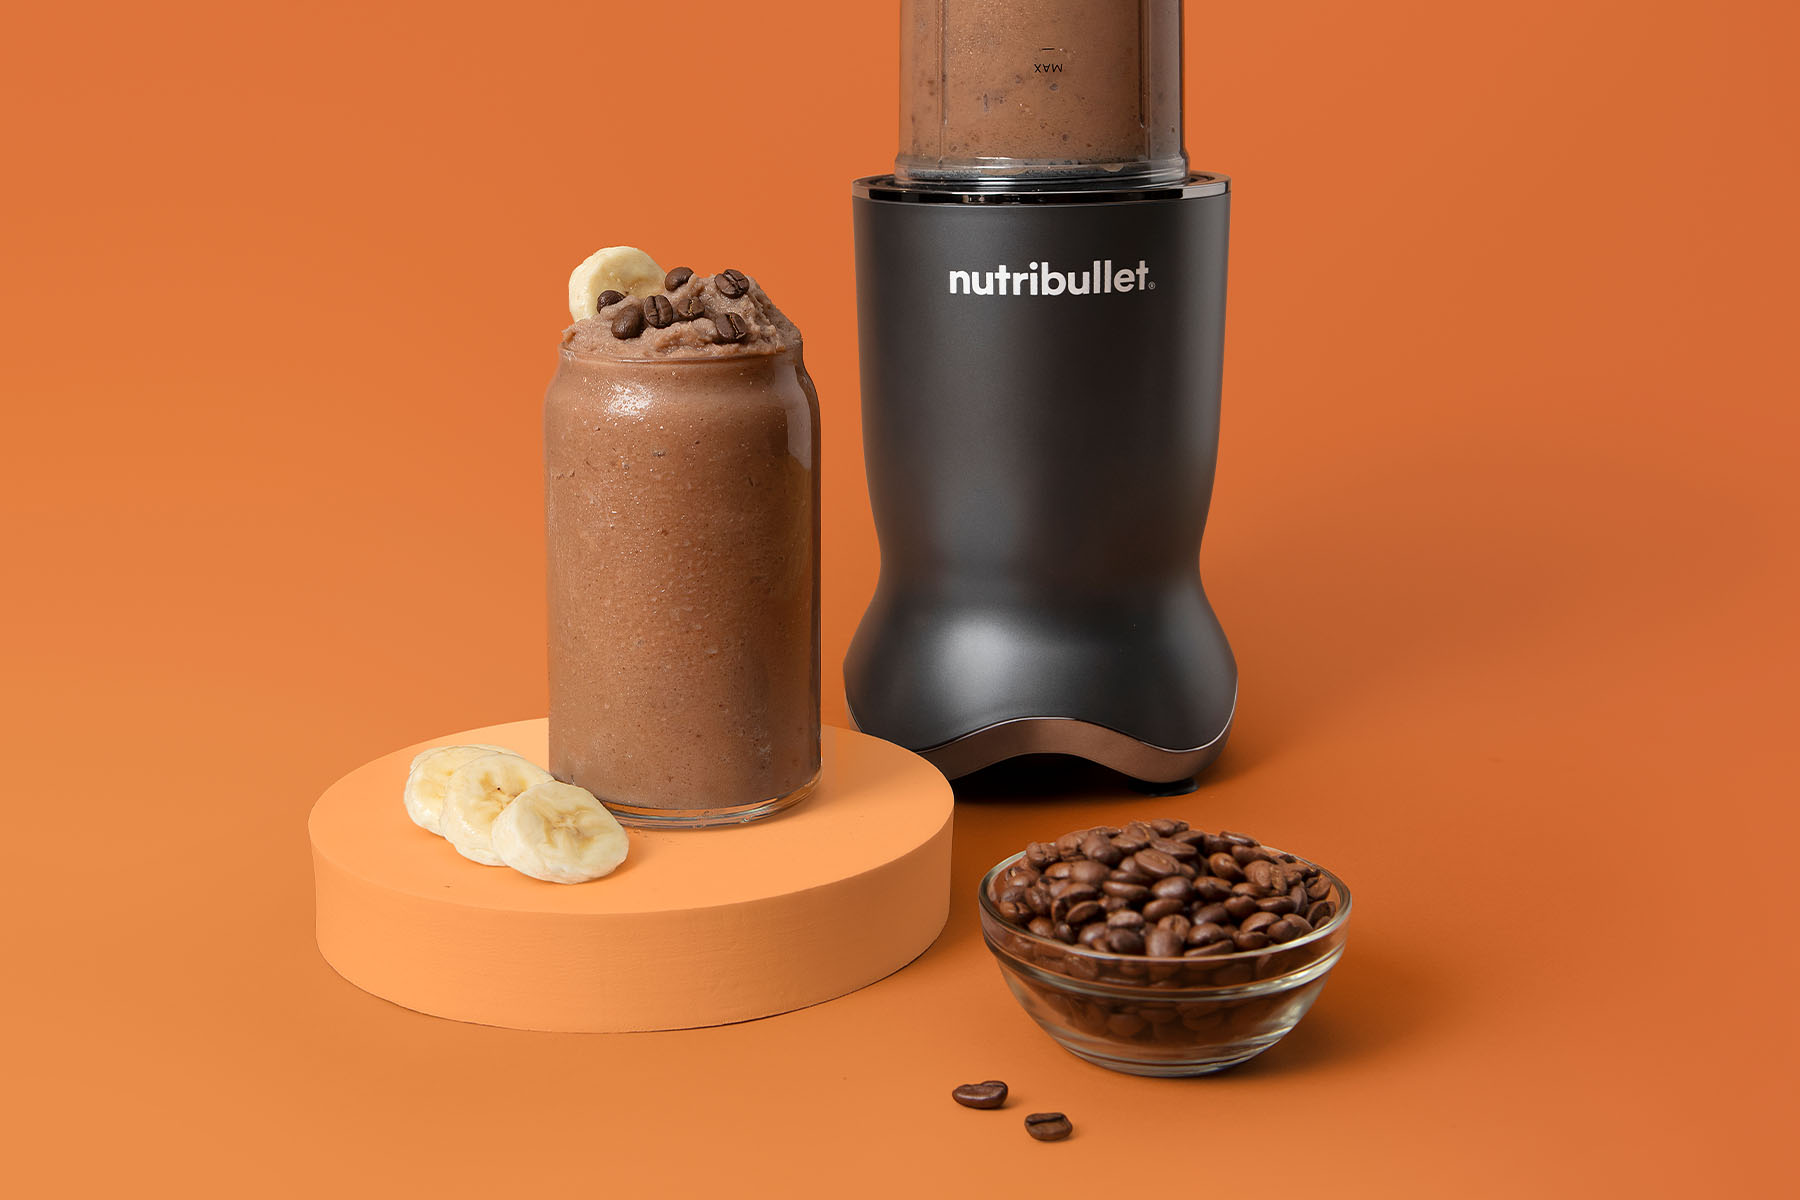 Creamy coffee smoothie in a nutribullet Ultra garnished with banana slices and chocolate chips on orange background